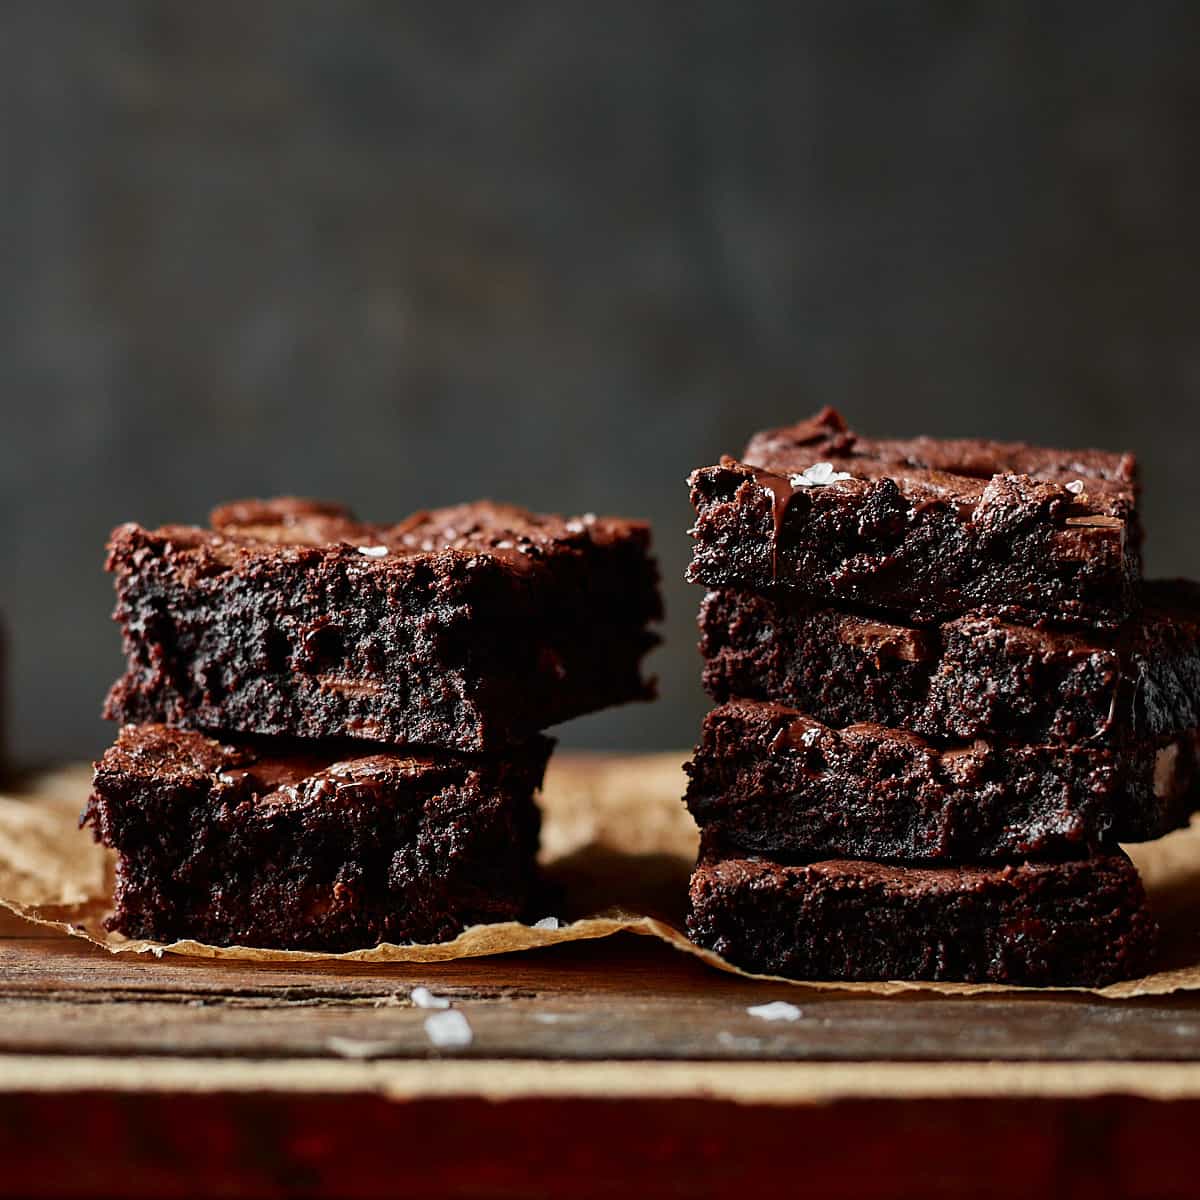 Side-by-side comparison of thicker and thinner brownies baked in different pan sizes